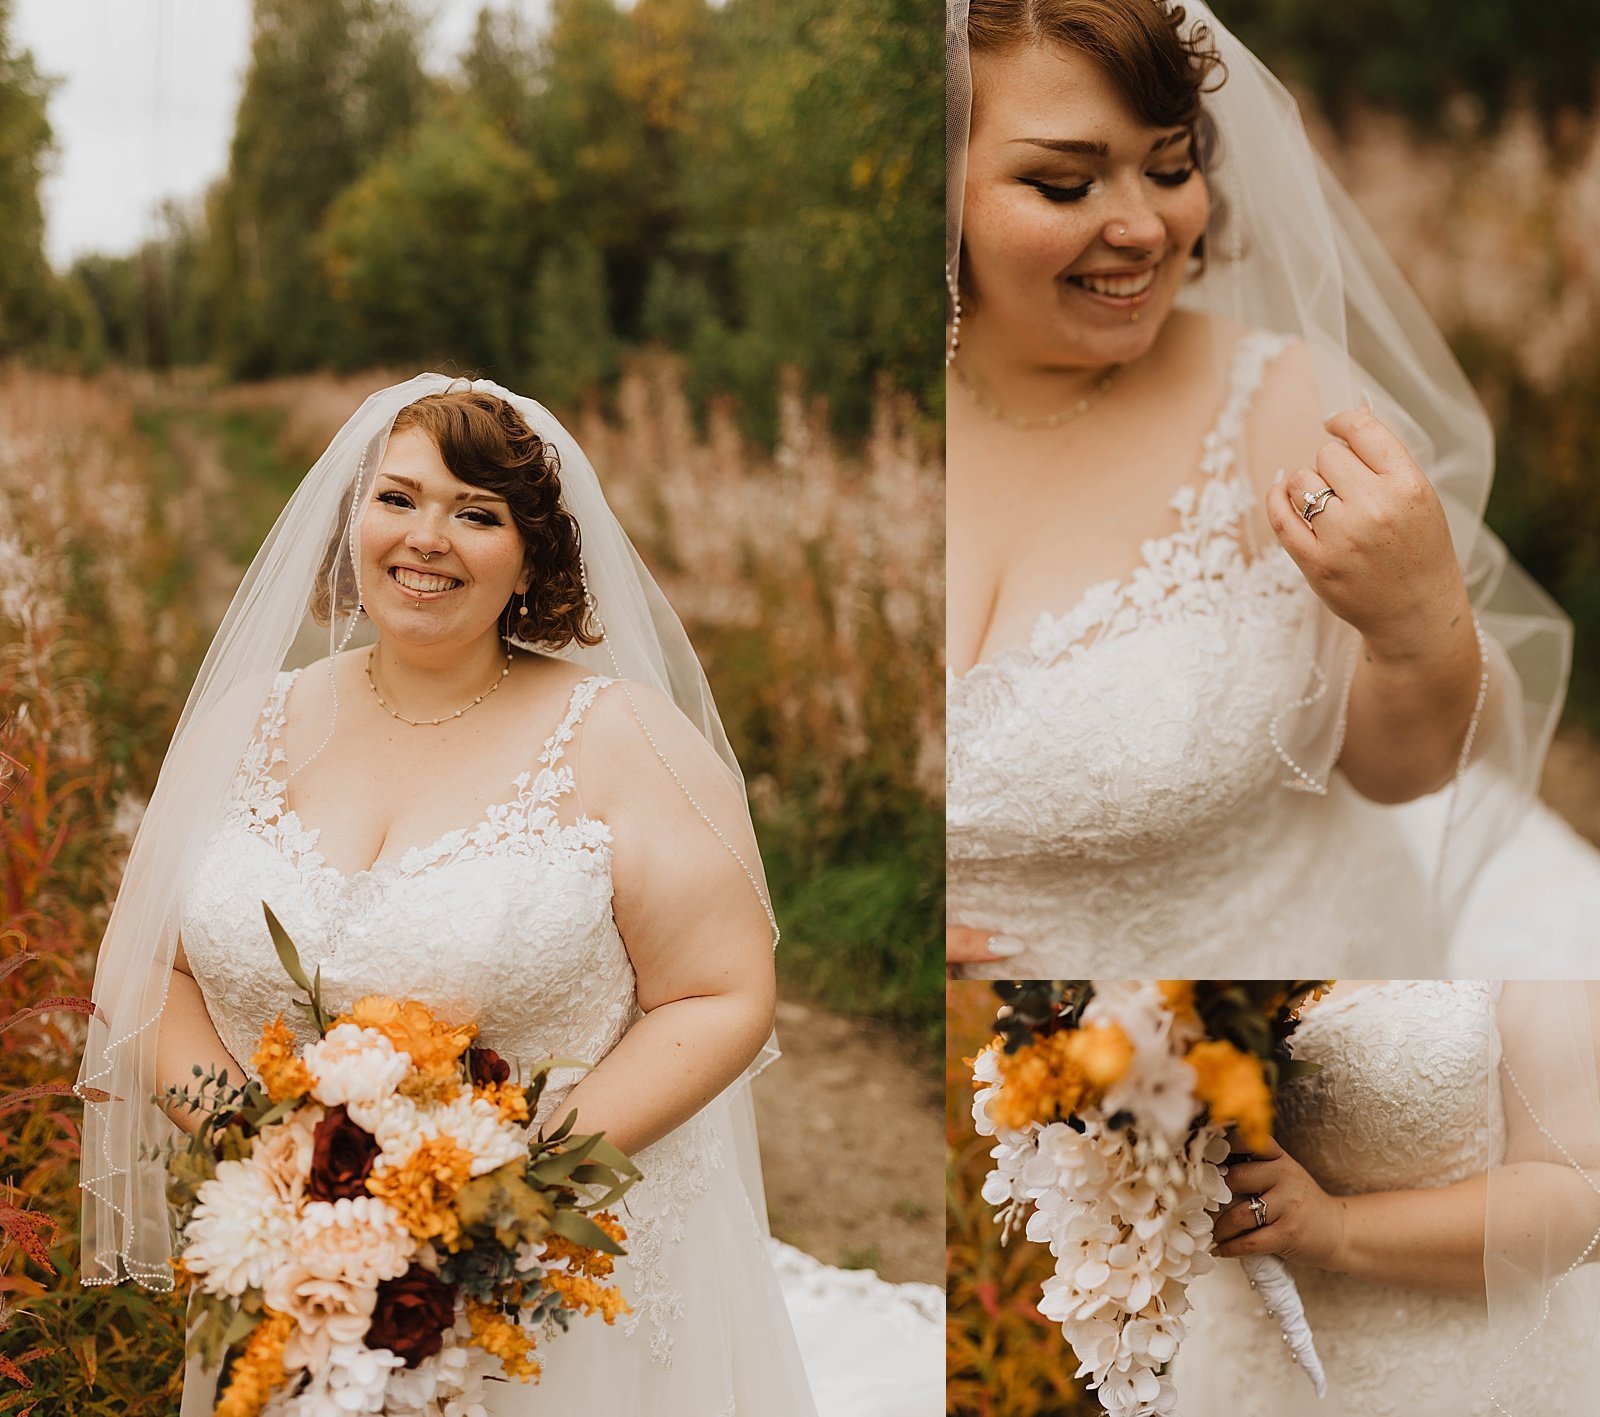  Bride with Fall inspired florals standing in a field after her wedding ceremony 